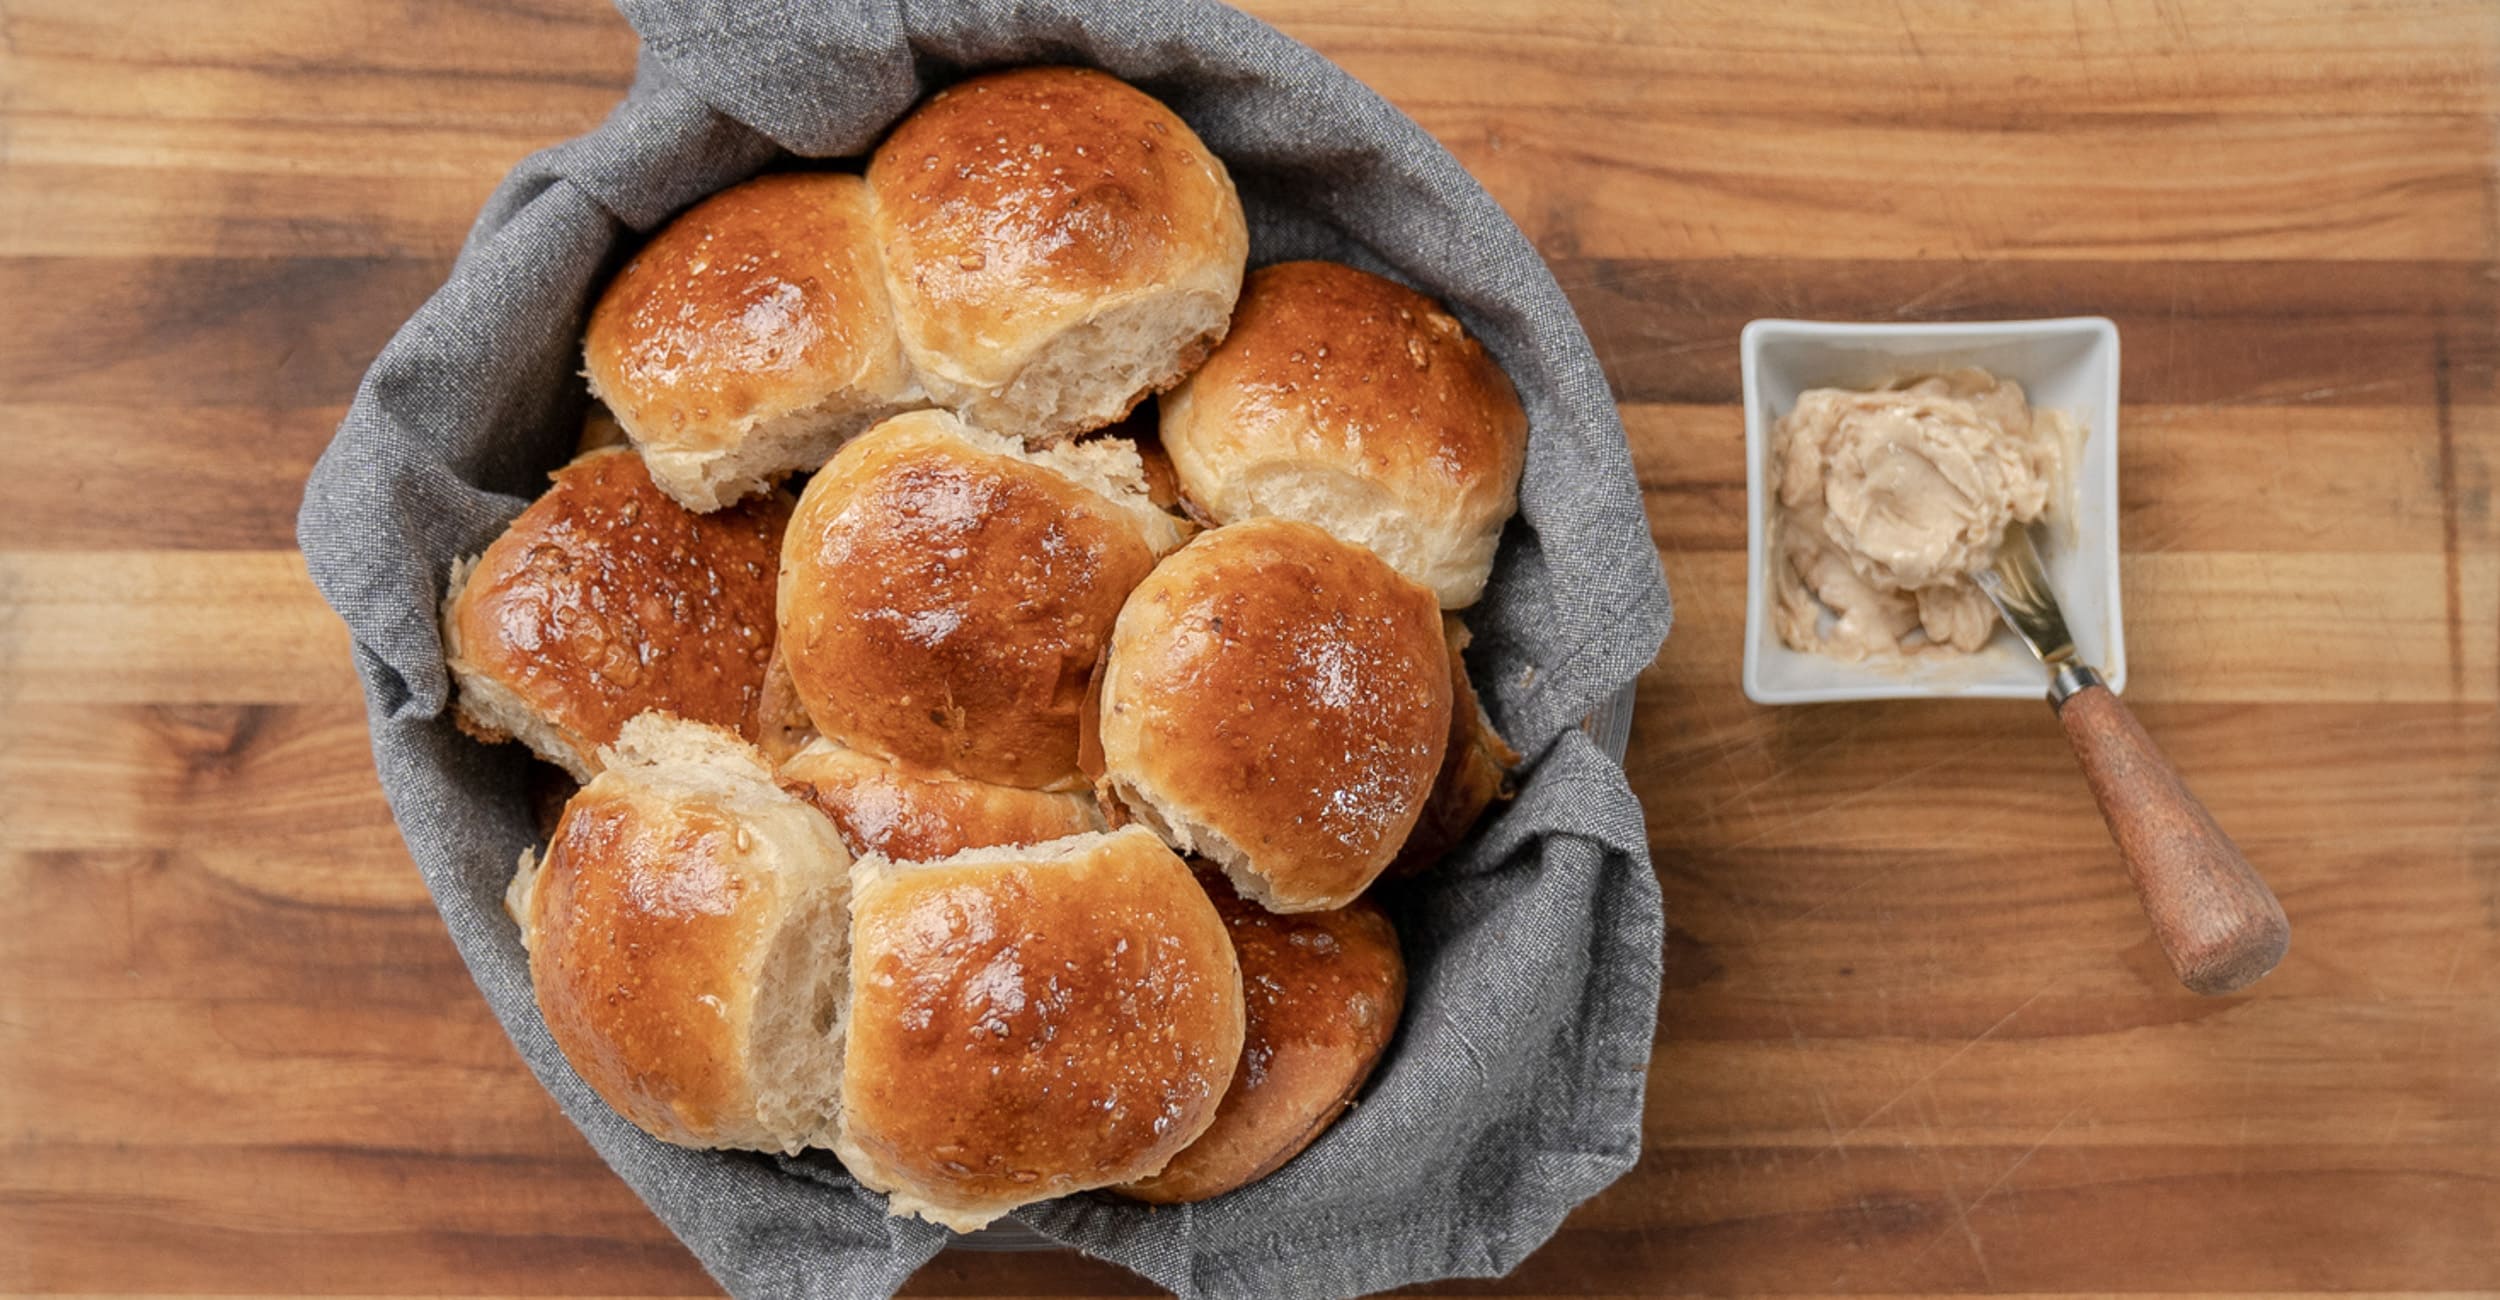 Bake Dinner Rolls in the Challenger Bread Pan – make fresh bread for your holiday table.